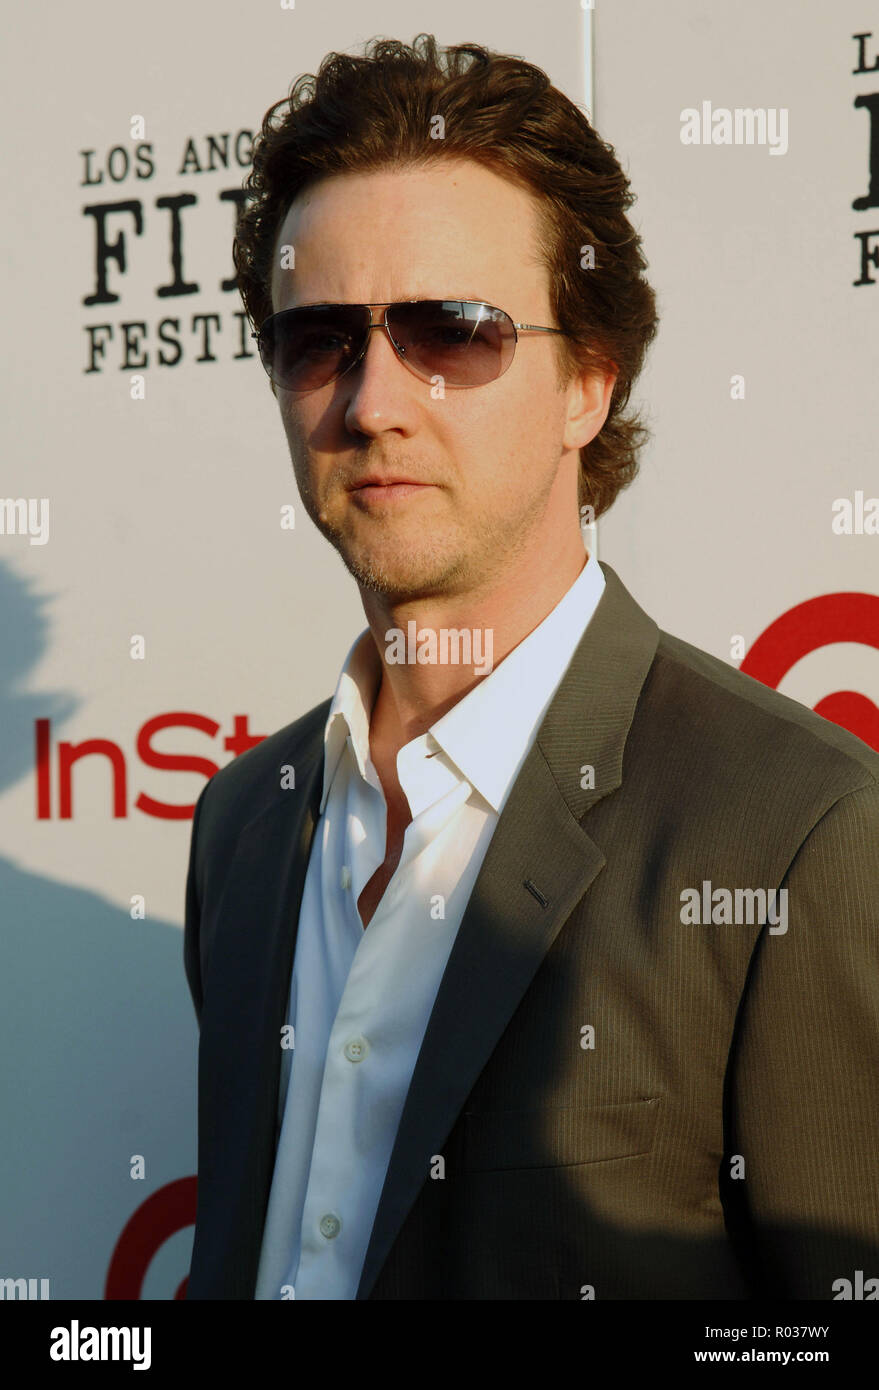 Edward Norton arriving at the Down In The Valley Premiere at ht e LA Film Festival Opening Night at the Arclight Theatre in Los Angeles. June 16, 2005.09 NortonEdward032 Red Carpet Event, Vertical, USA, Film Industry, Celebrities,  Photography, Bestof, Arts Culture and Entertainment, Topix Celebrities fashion /  Vertical, Best of, Event in Hollywood Life - California,  Red Carpet and backstage, USA, Film Industry, Celebrities,  movie celebrities, TV celebrities, Music celebrities, Photography, Bestof, Arts Culture and Entertainment,  Topix, headshot, vertical, one person,, from the year , 2005 Stock Photo